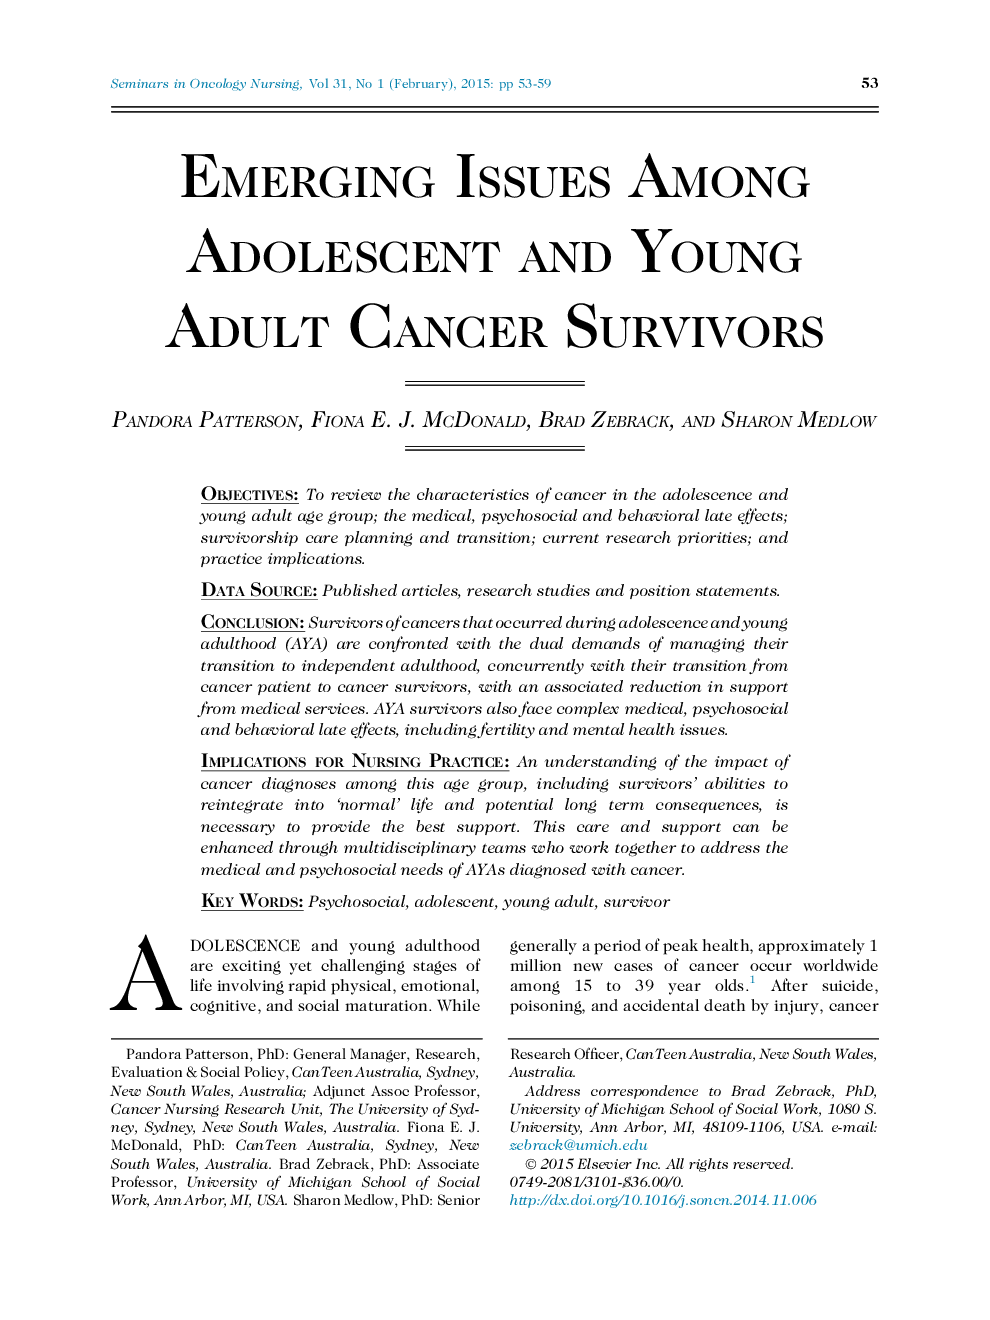 Emerging Issues Among Adolescent and Young Adult Cancer Survivors